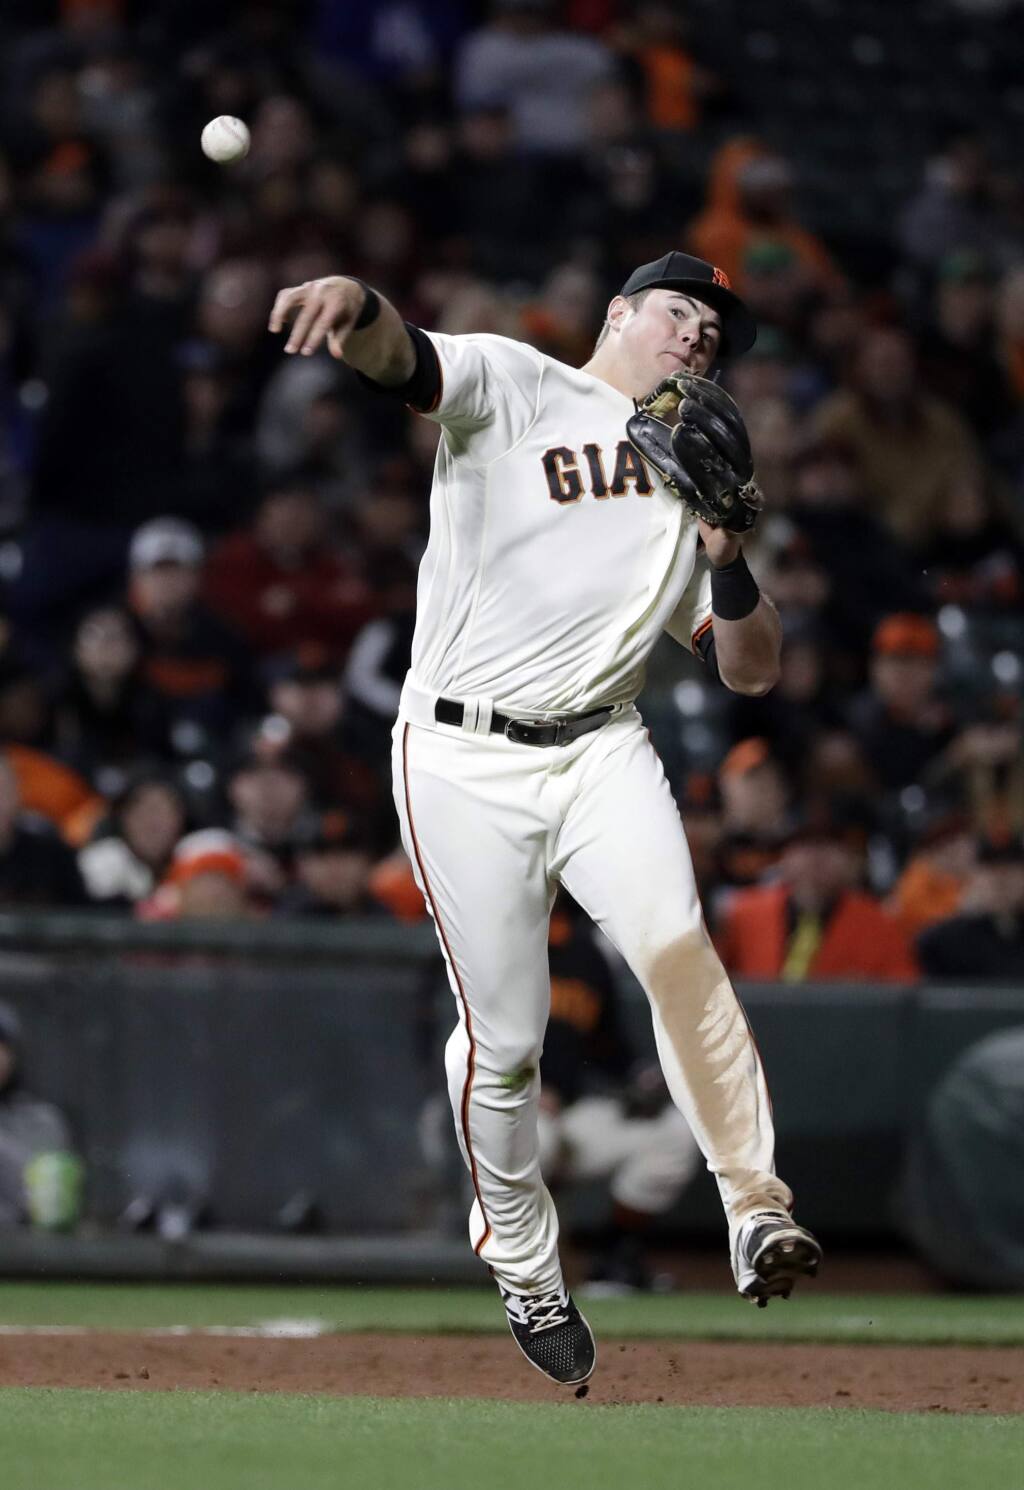 Rookie Matt Duffy proves himself with the Giants - Minor League Ball